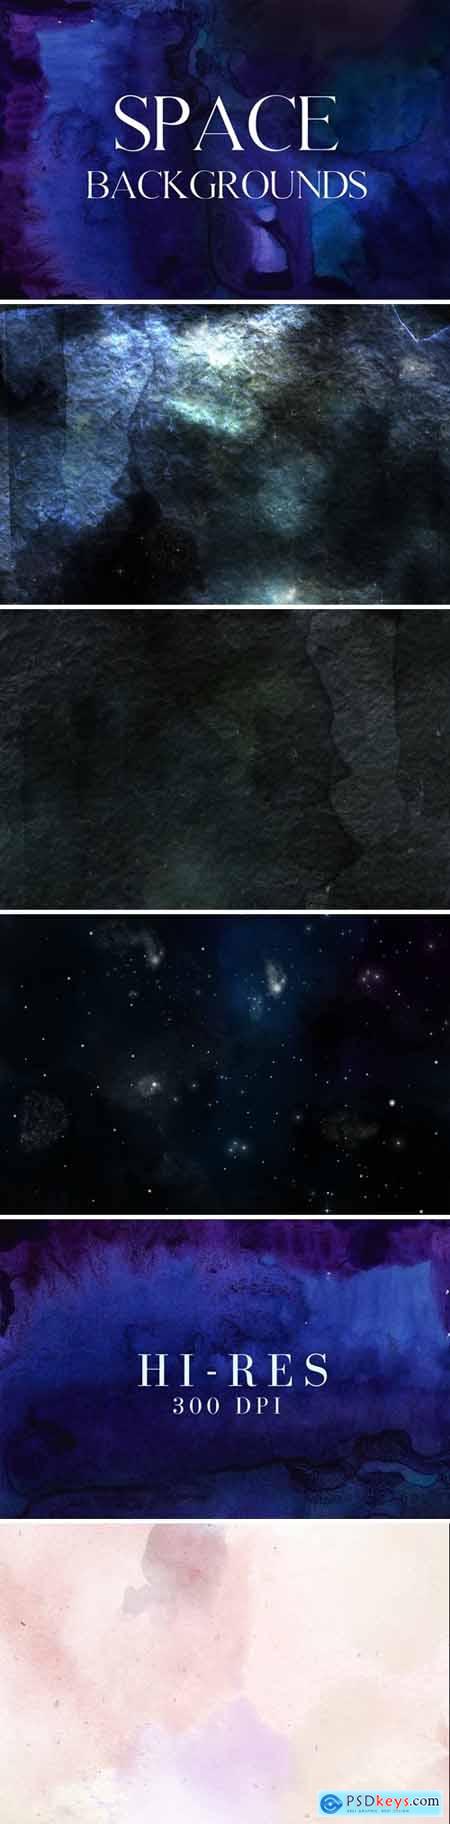 5 mystic space watercolor backgrounds